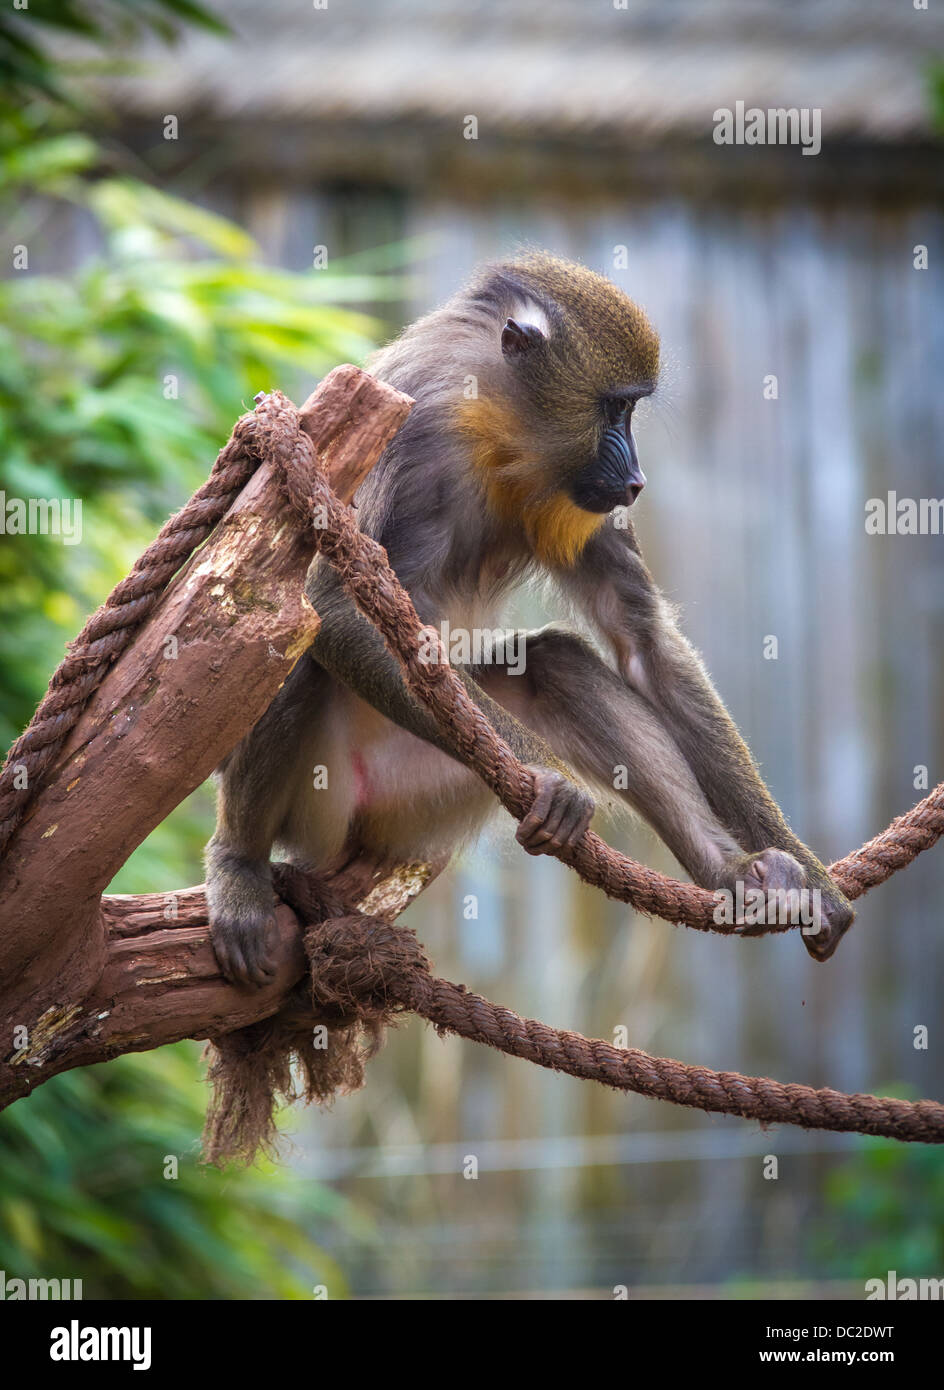 A Mandrill monkey (Mandrillus sphinx) sat in a tree with rope in captivity at South Lakes Wild Animal Park. Stock Photo